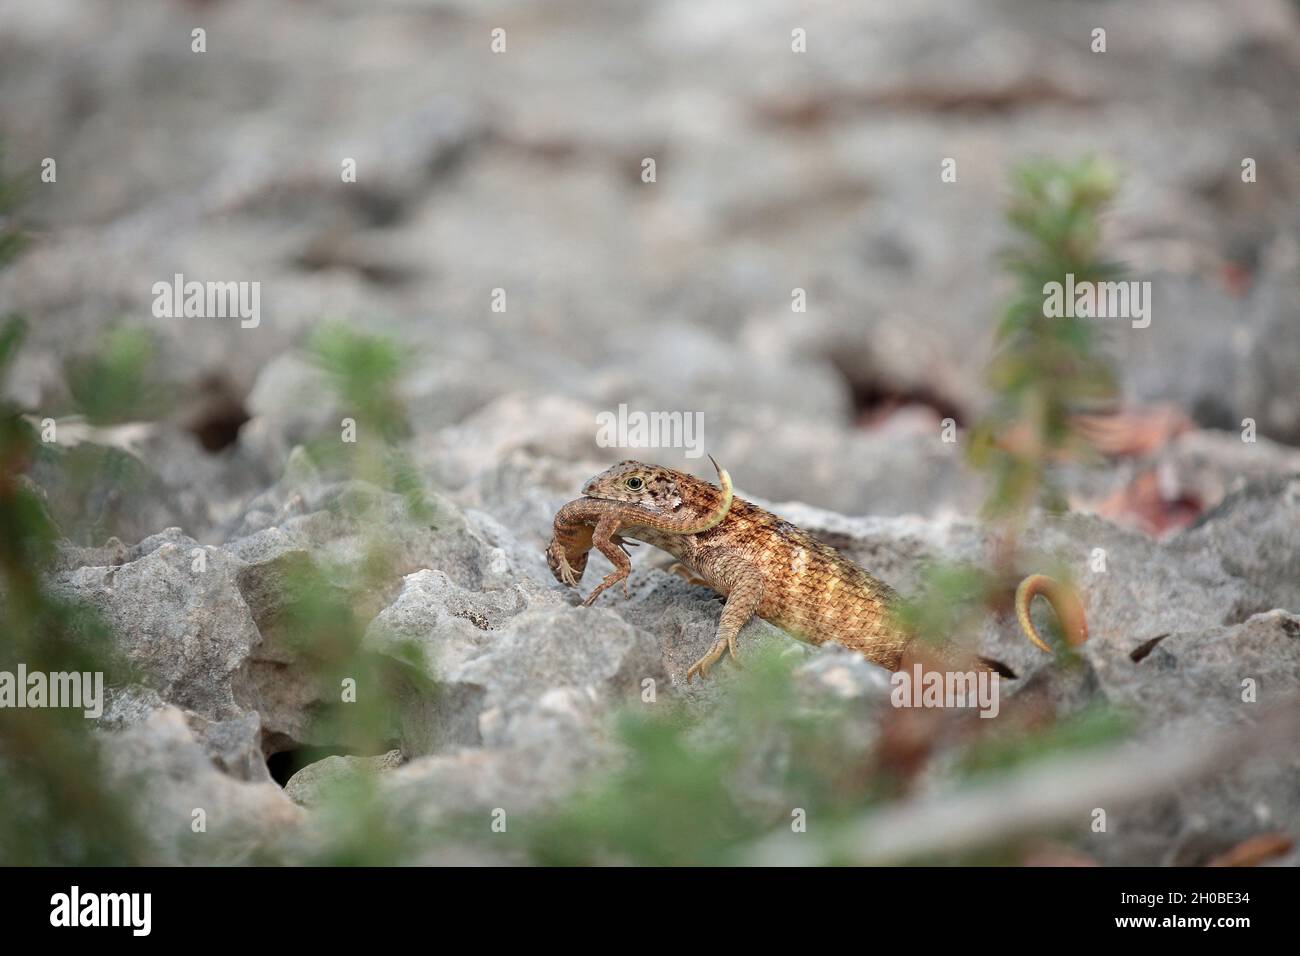 Northern curly-tailed lizard (Leiocephalus carinatus) with a congener in its mouth, Cuba Stock Photo